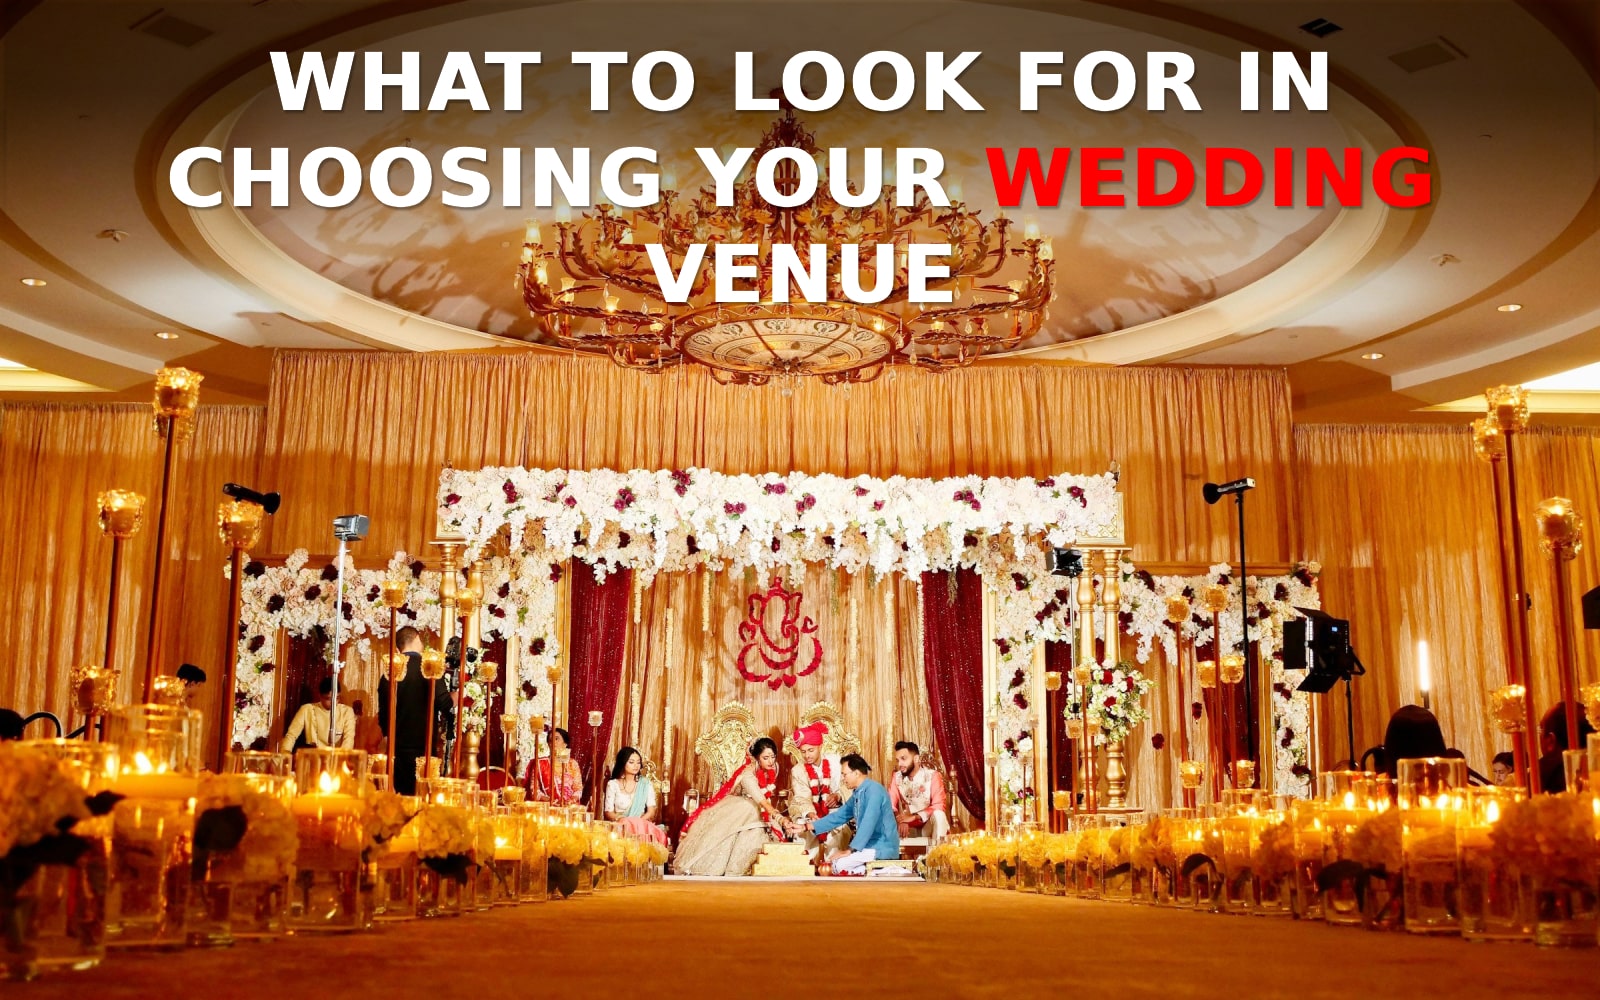 What to look for in choosing your wedding venue